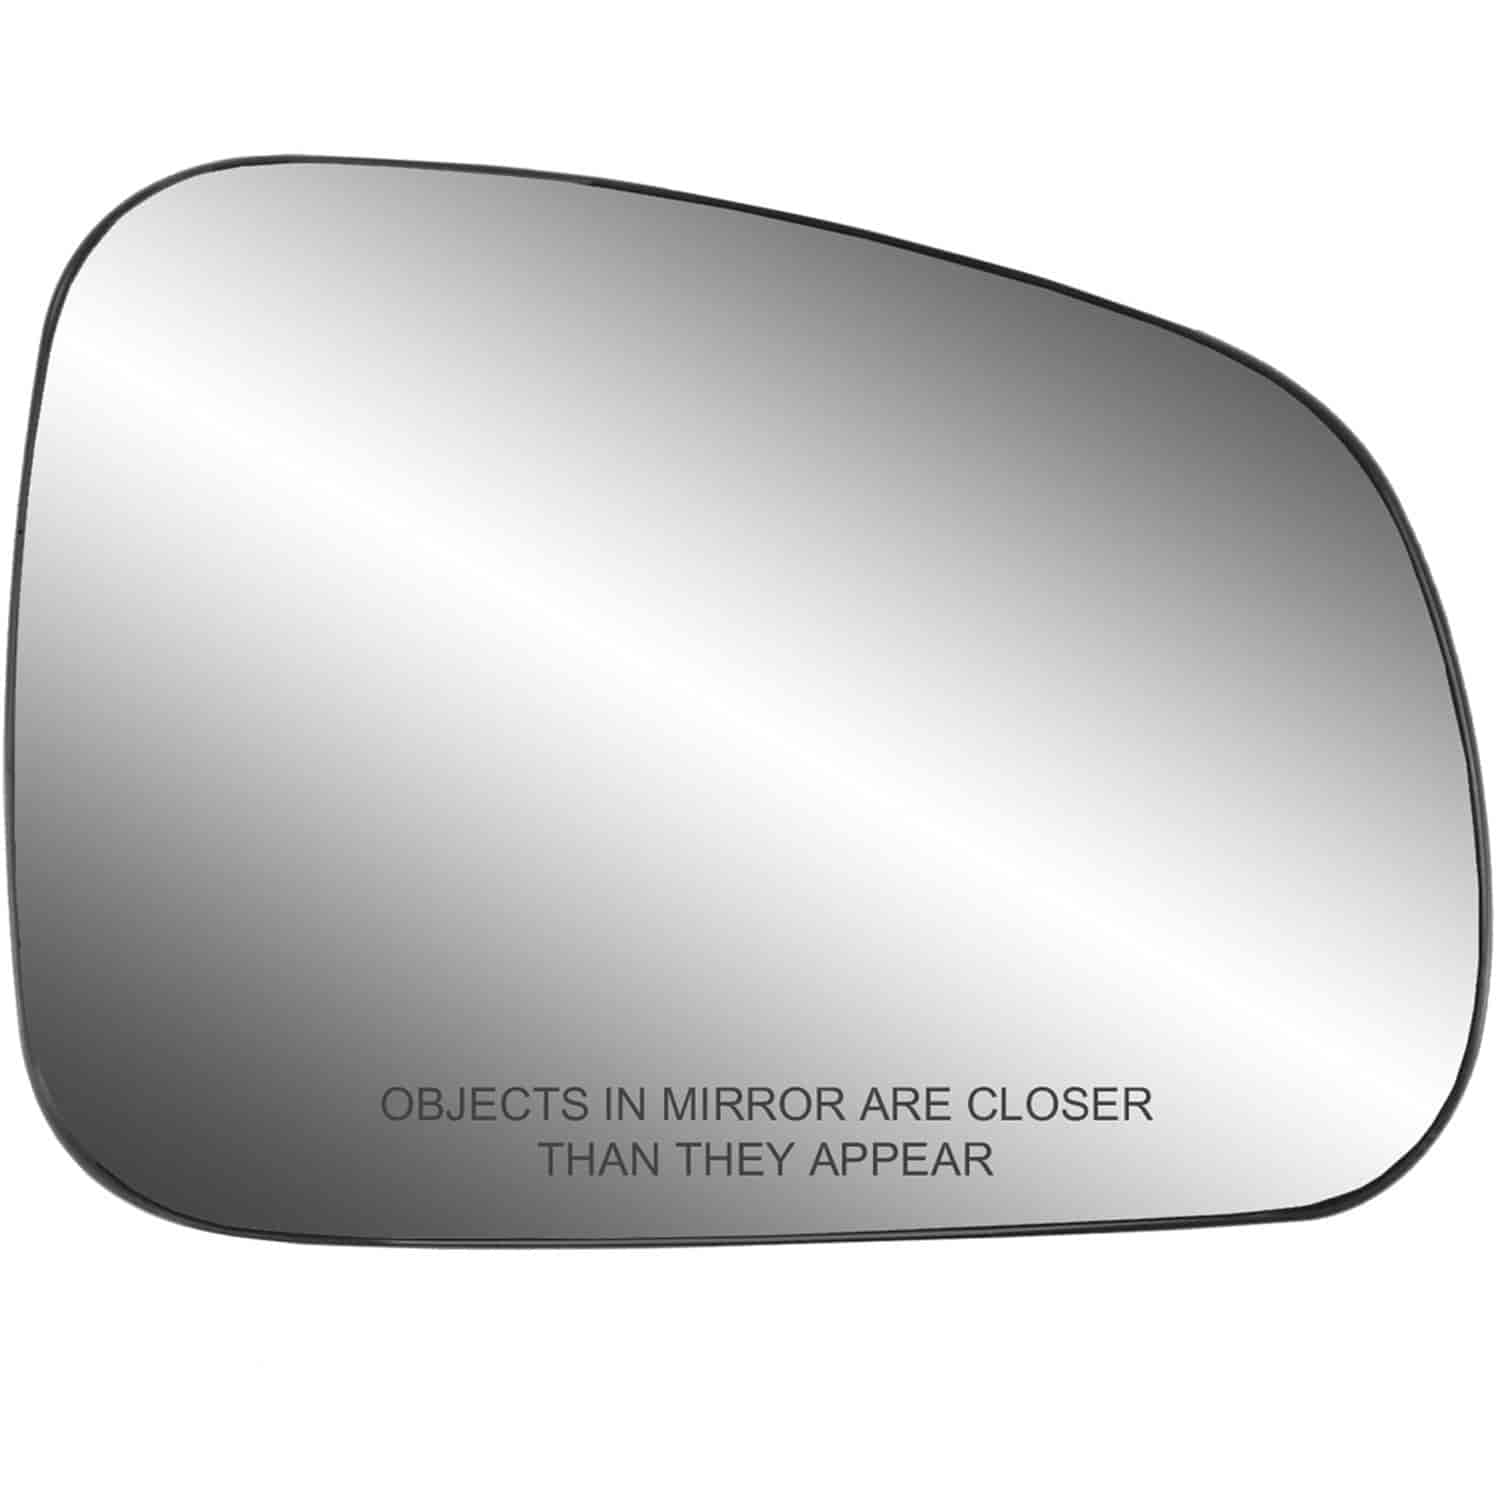 Replacement Glass Assembly for 05-08 Grand Prix replace your cracked or broken passenger side mirror